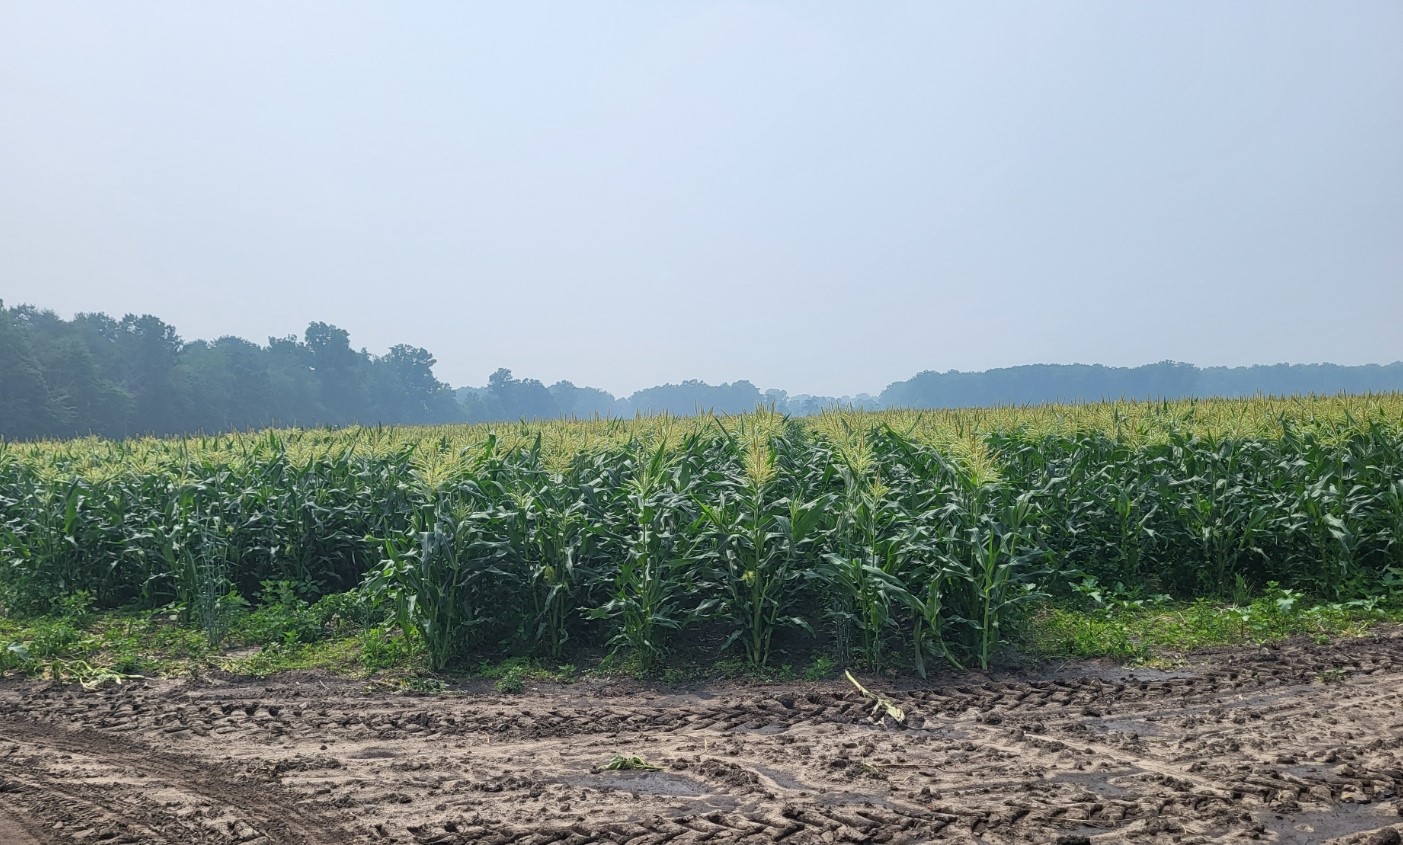 A sweet corn field with hazy skies in the background.